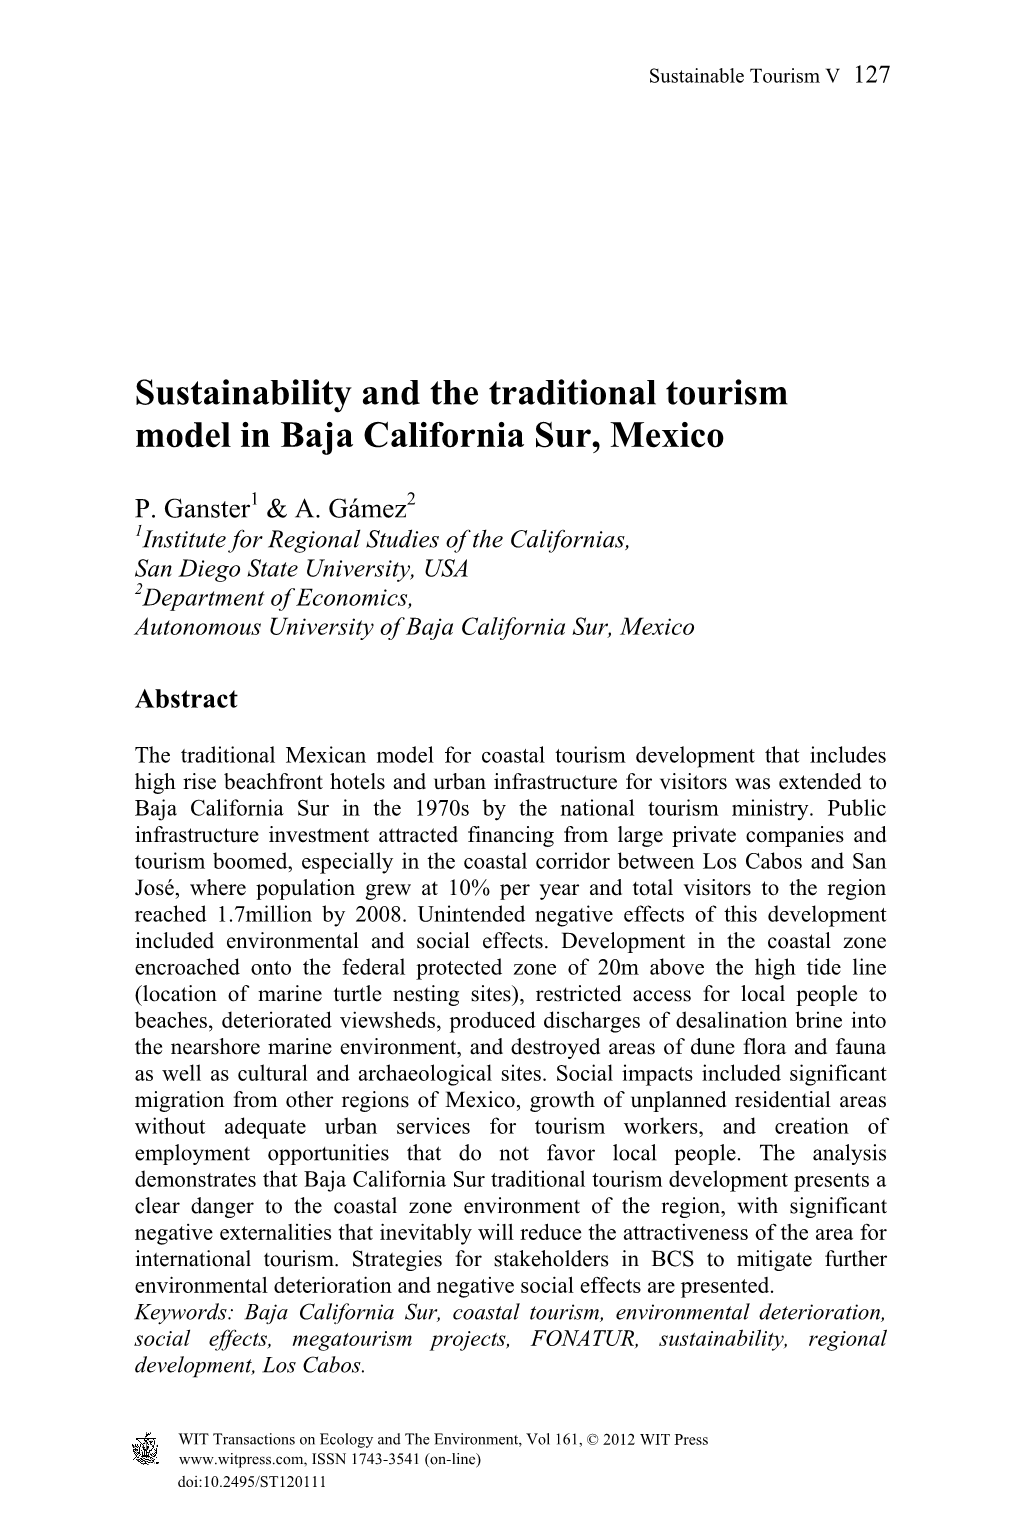 Sustainability and the Traditional Tourism Model in Baja California Sur, Mexico